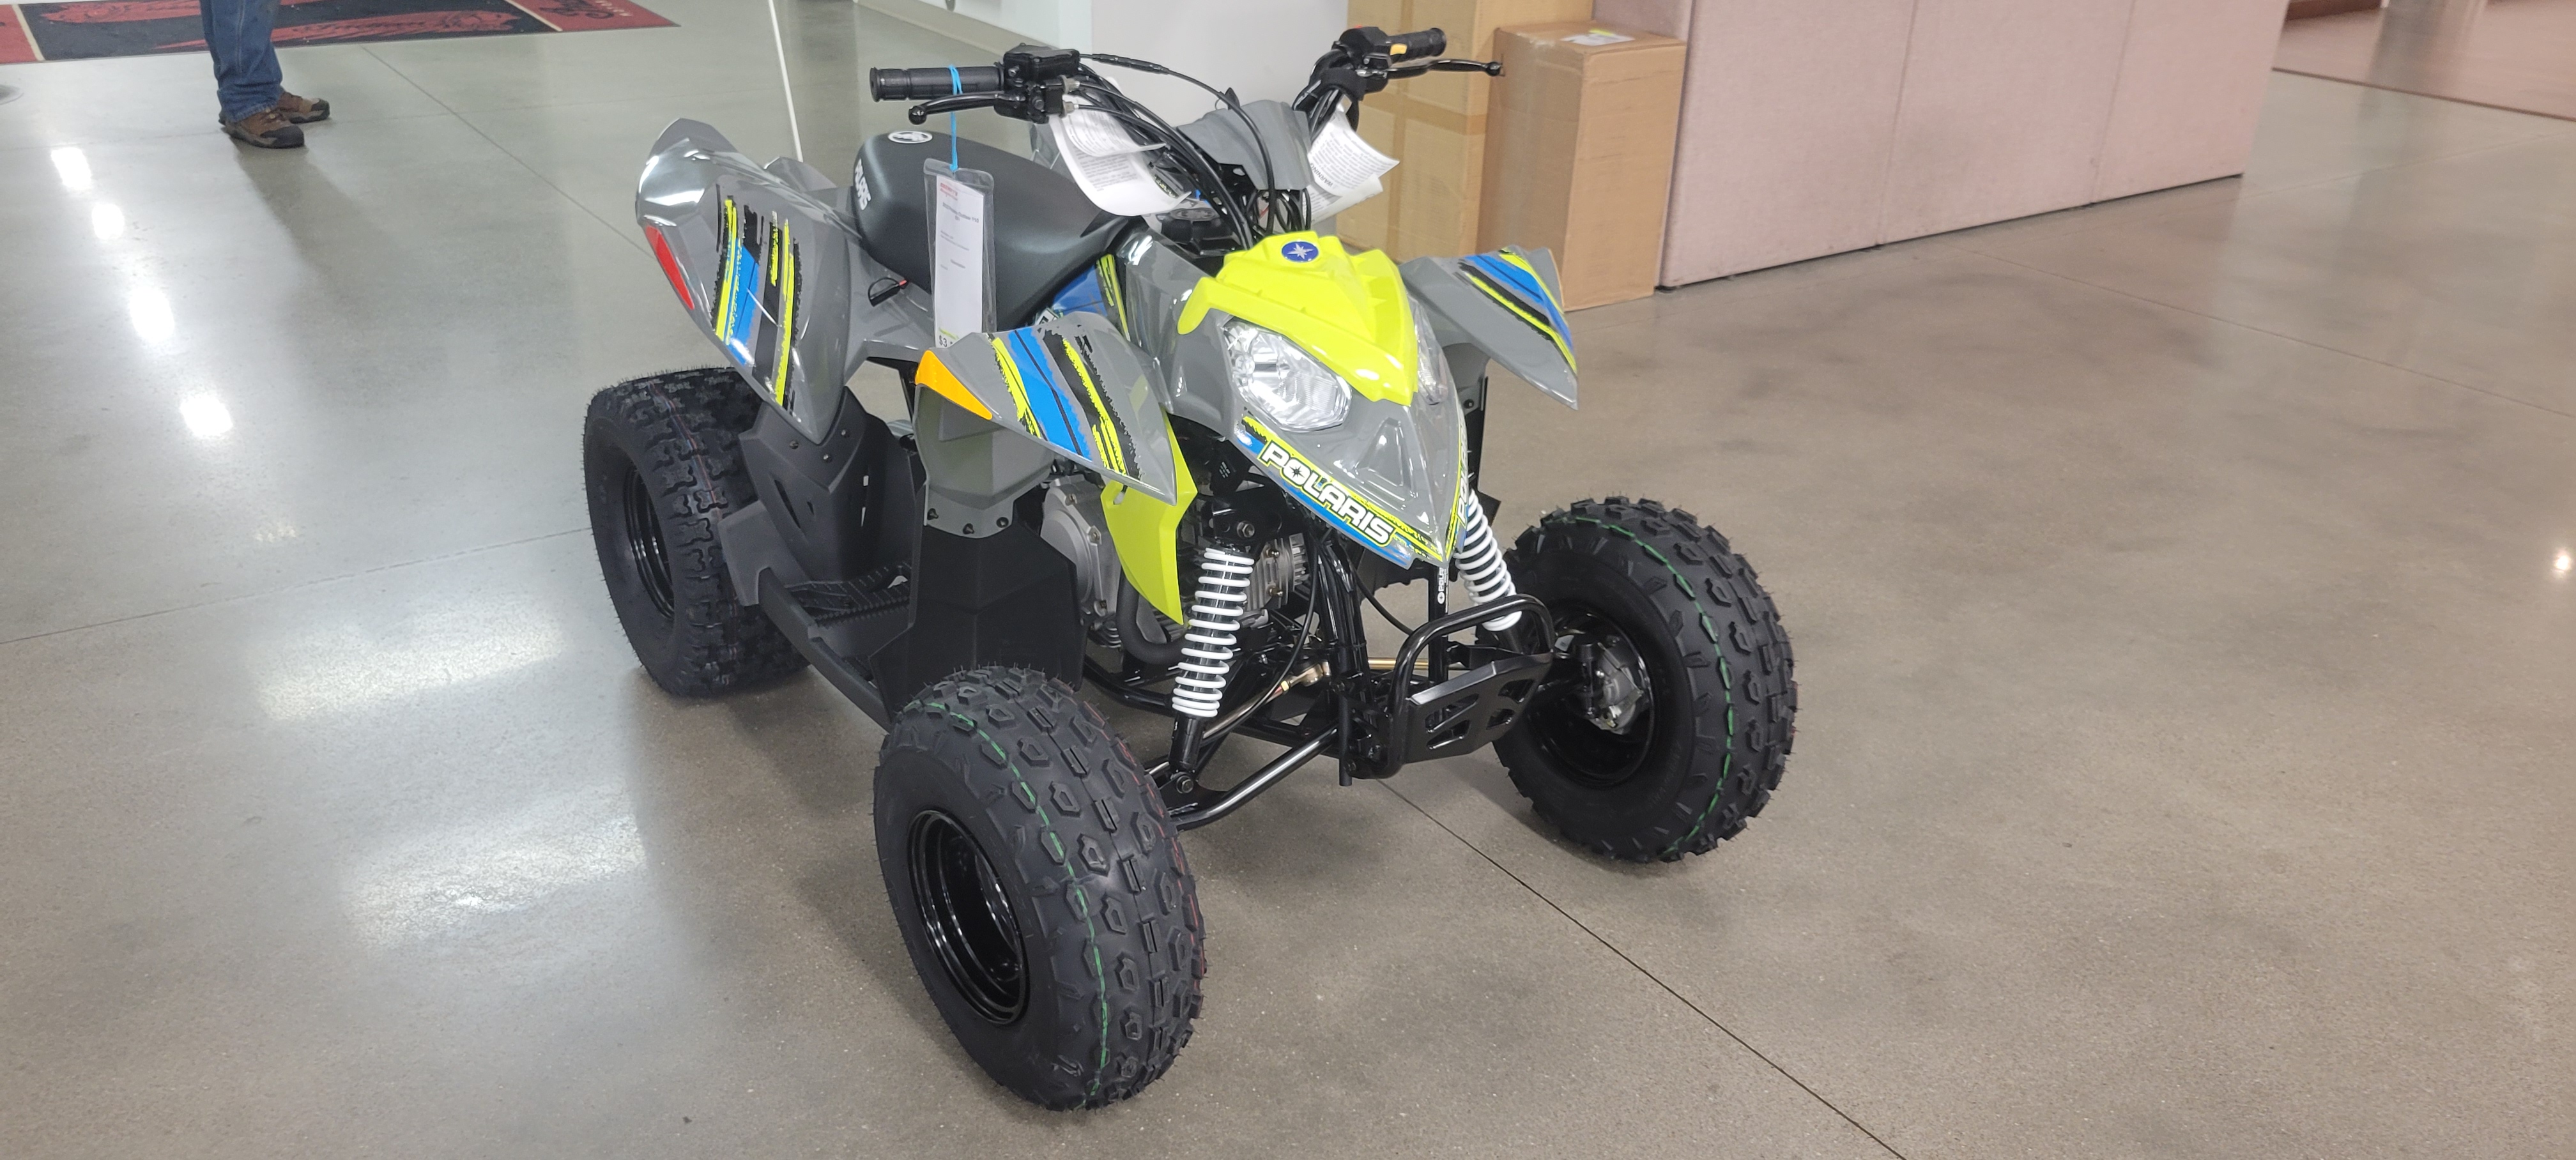 2023 Polaris Outlaw 110 EFI at Brenny's Motorcycle Clinic, Bettendorf, IA 52722